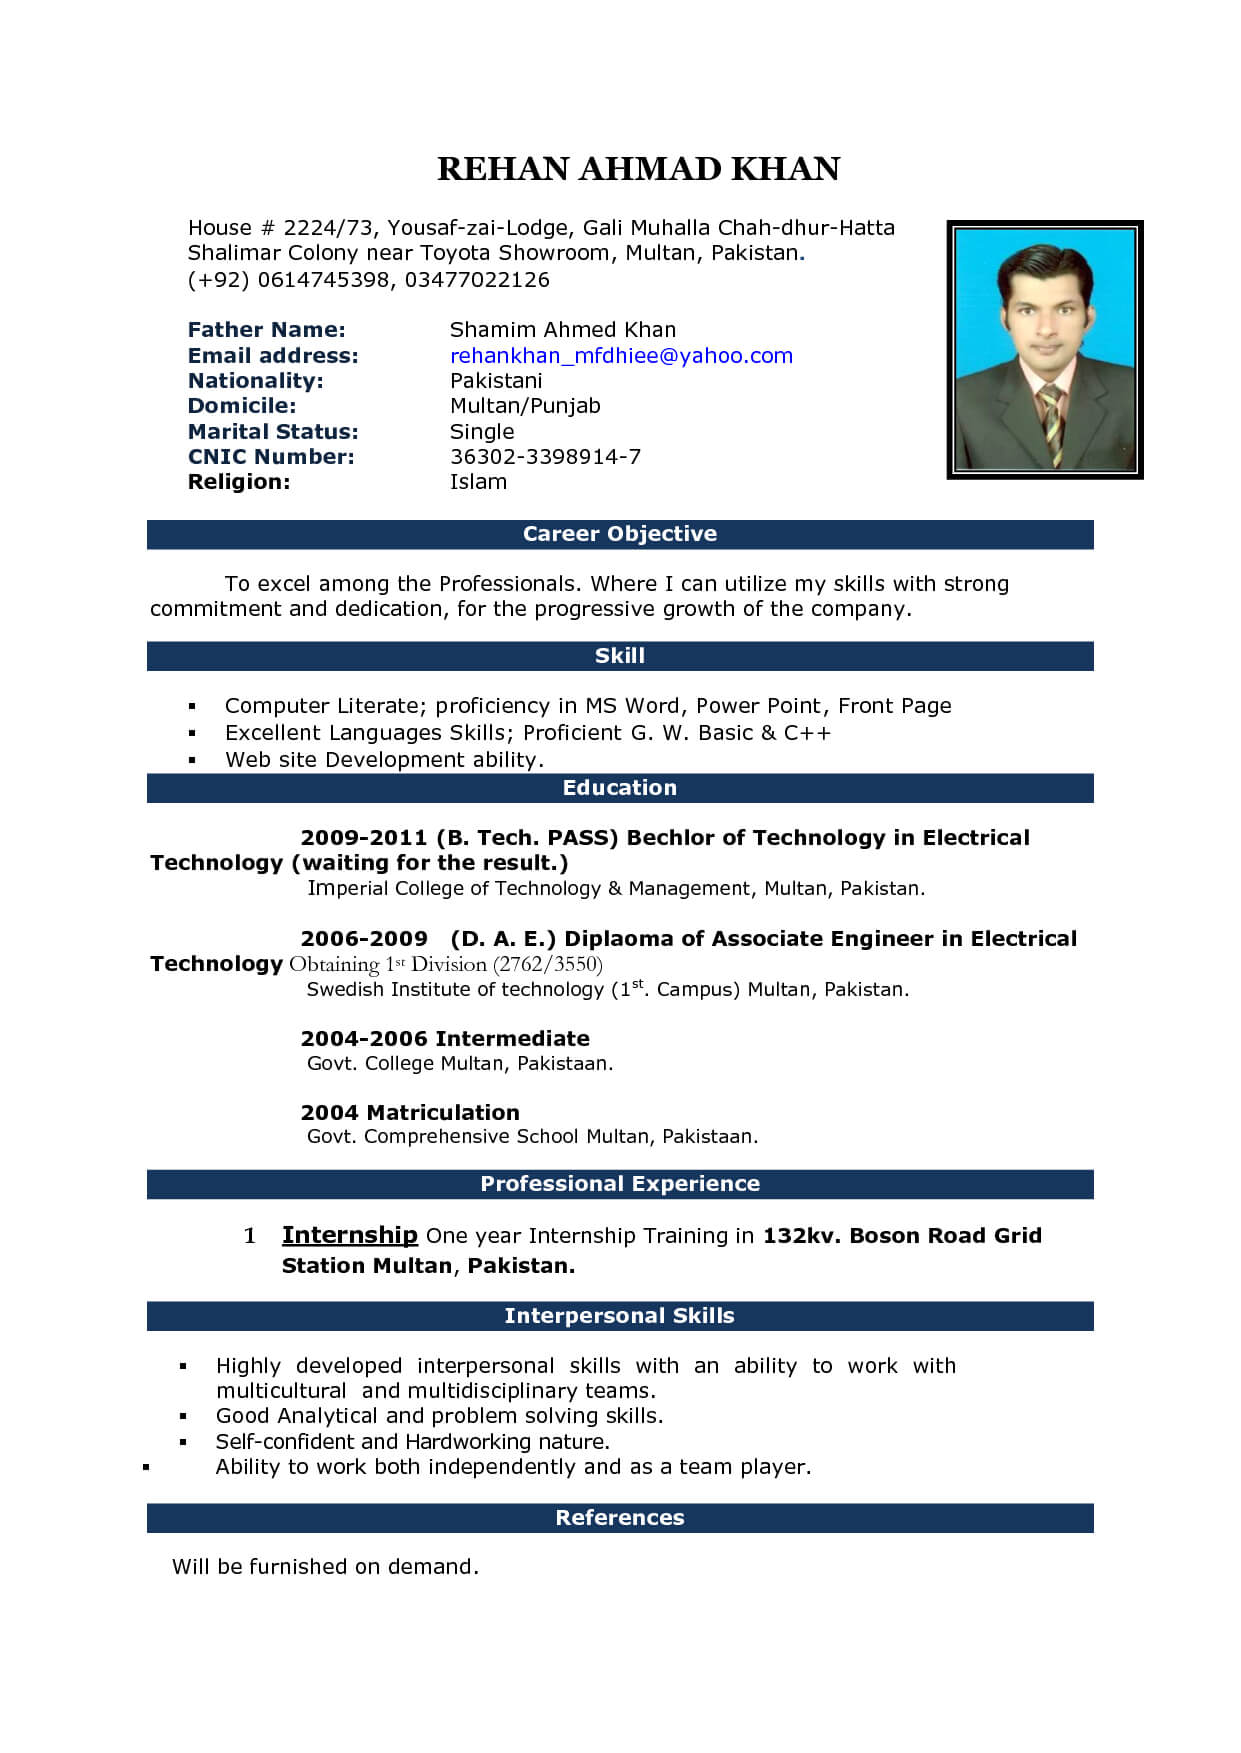 Image Result For Cv Format In Ms Word 2007 Free Download With Regard To Resume Templates Word 2007